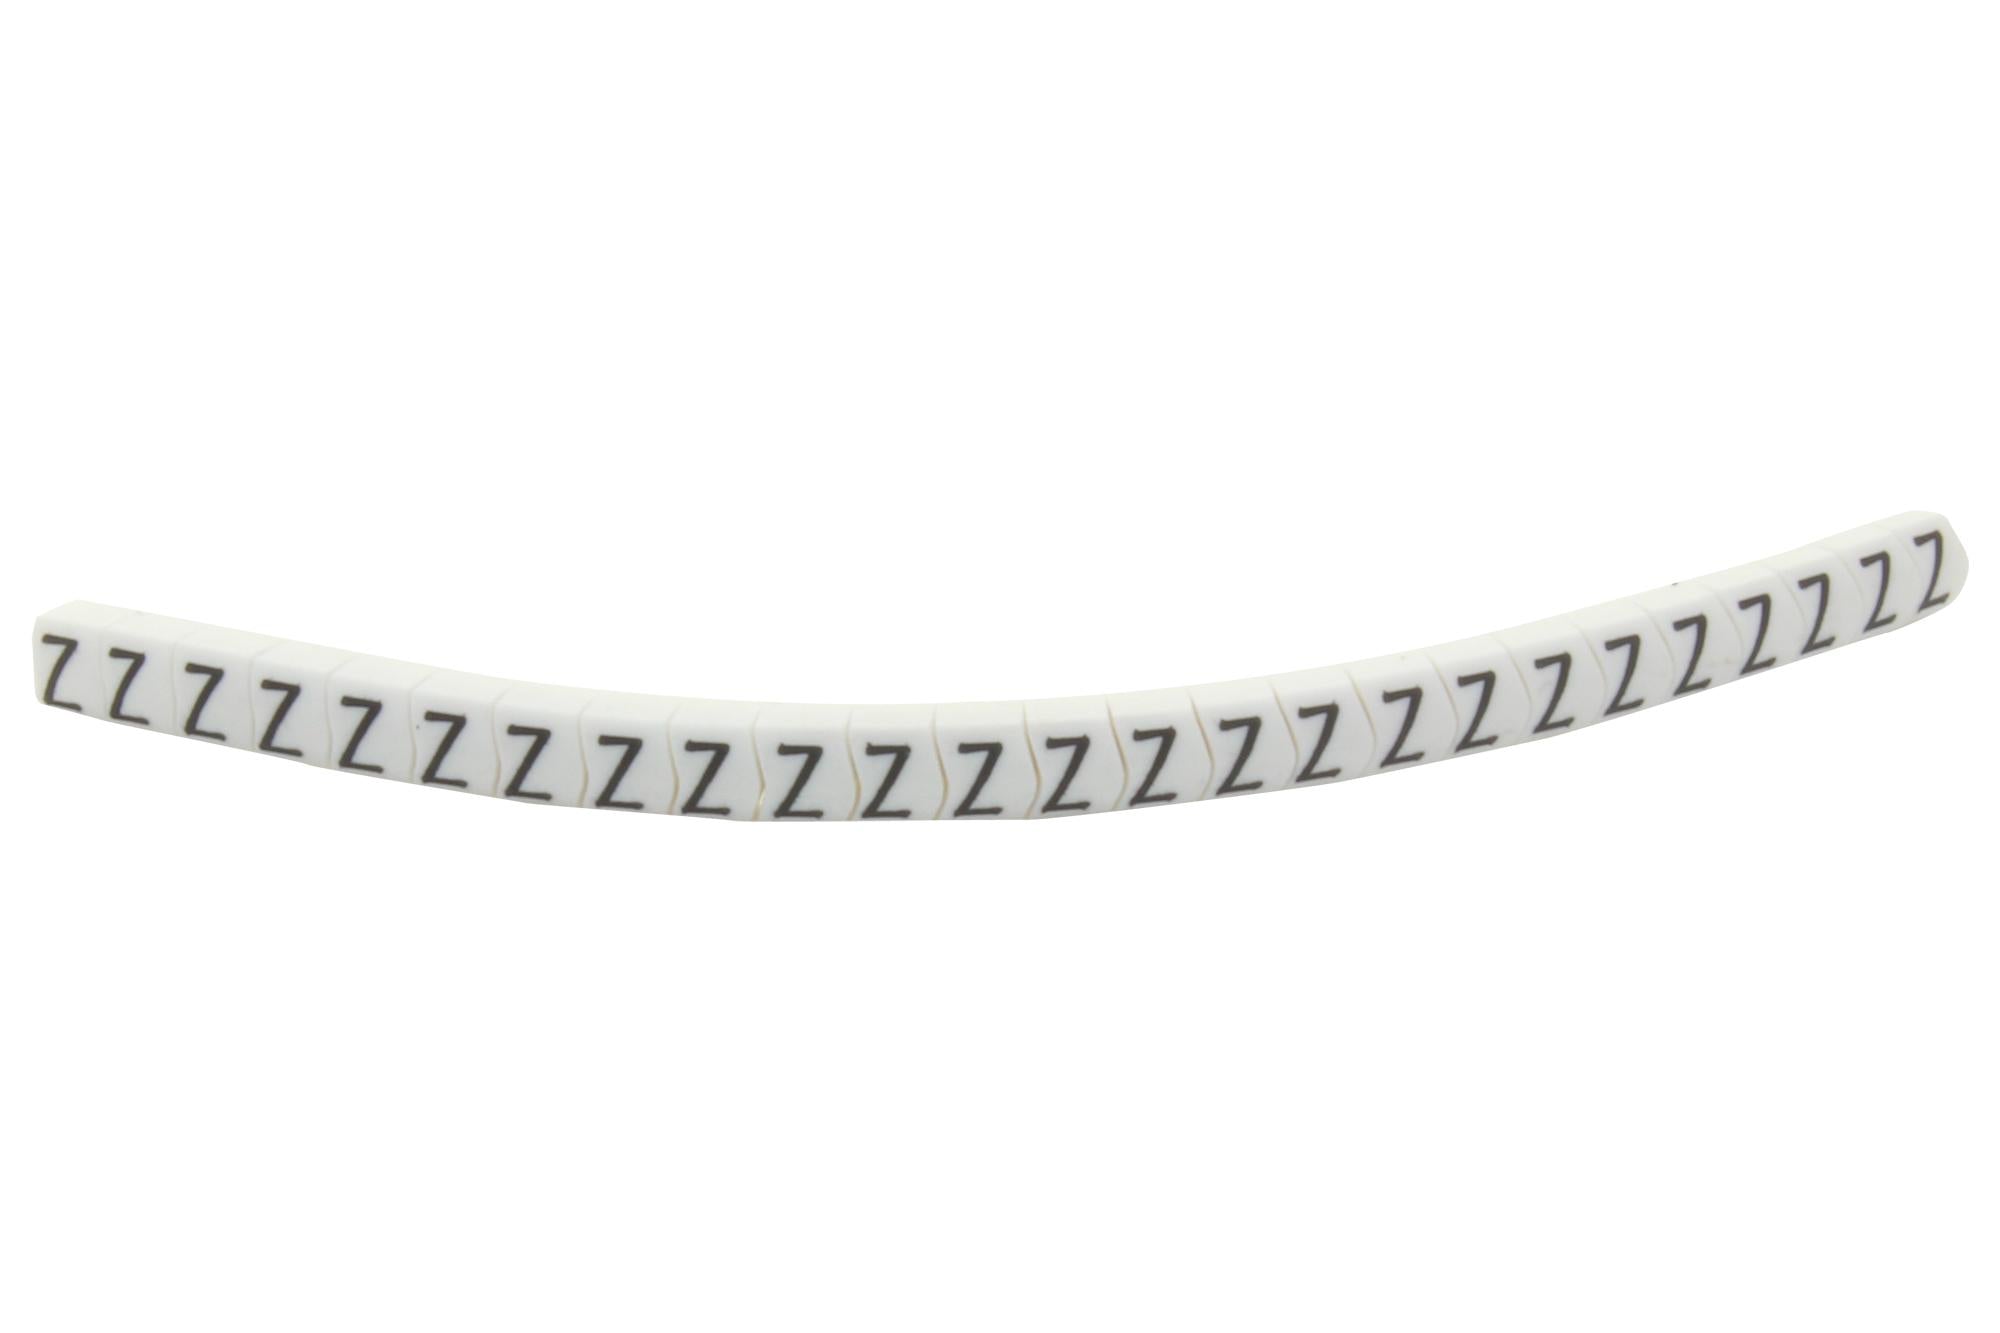 901-11049 CABLE MARKER, PRE PRINTED, PVC, WHITE HELLERMANNTYTON